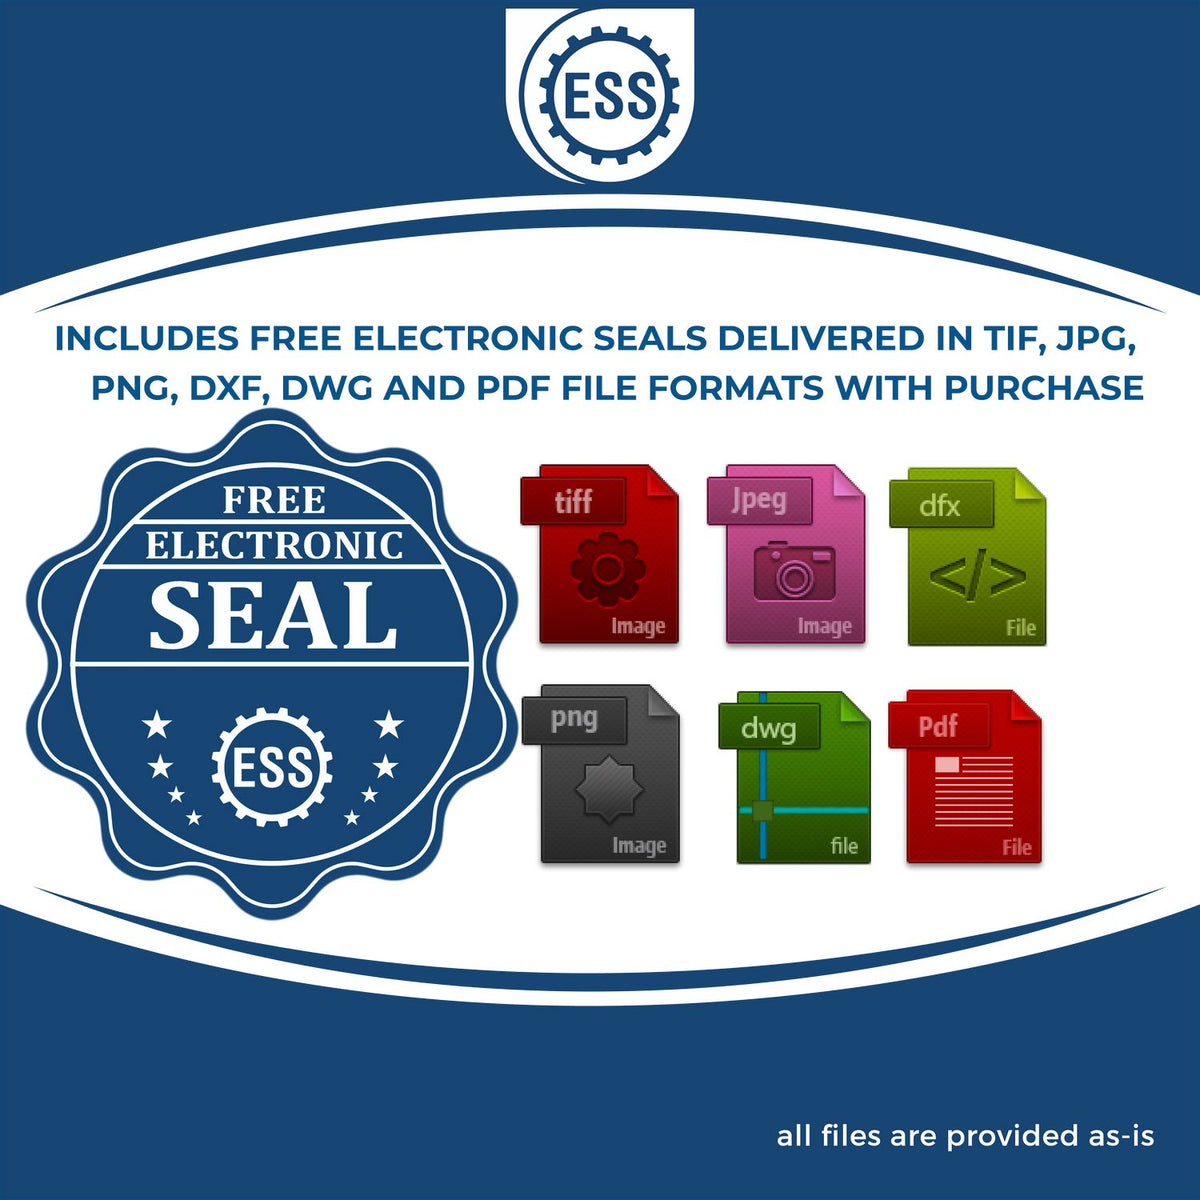 An infographic for the free electronic seal for the Rhode Island Desk Architect Embossing Seal illustrating the different file type icons such as DXF, DWG, TIF, JPG and PNG.